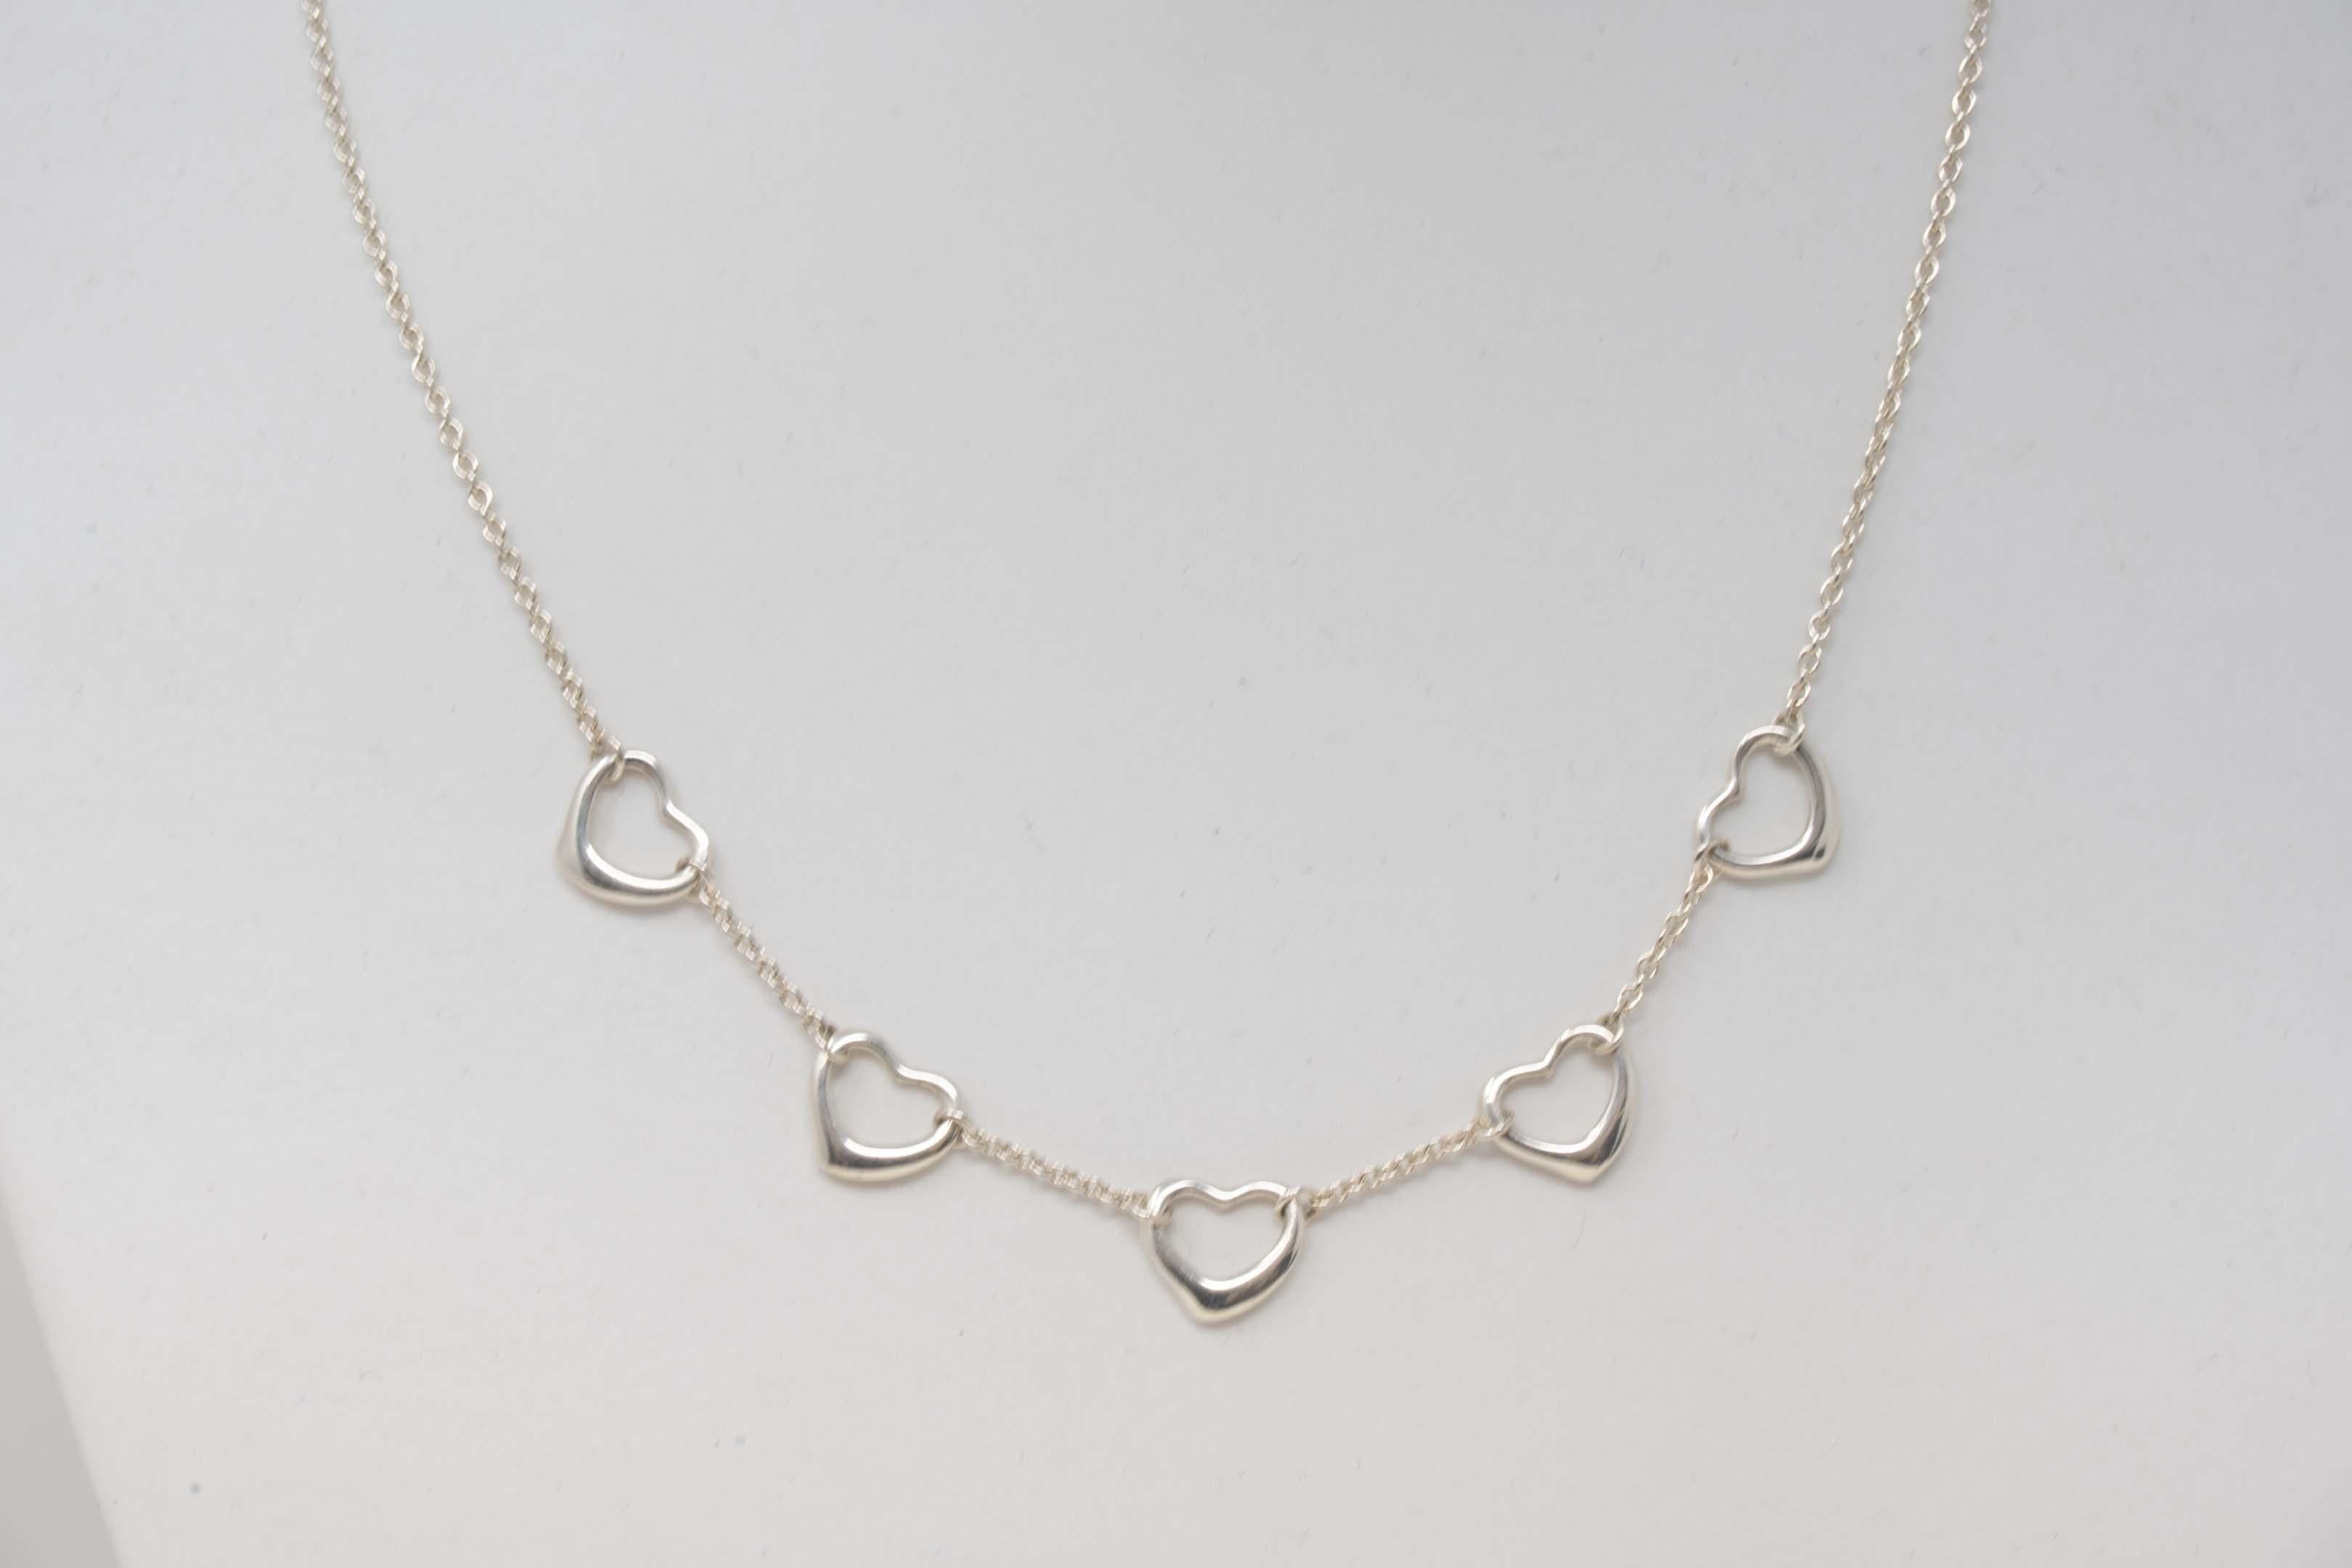 Tiffany & Co Elsa Peretti five open heart pendant necklace. Measures 15 3/4 inches long, stamped Tiffany & Co, Peretti 925 Spain. In good condition, made in Spain.